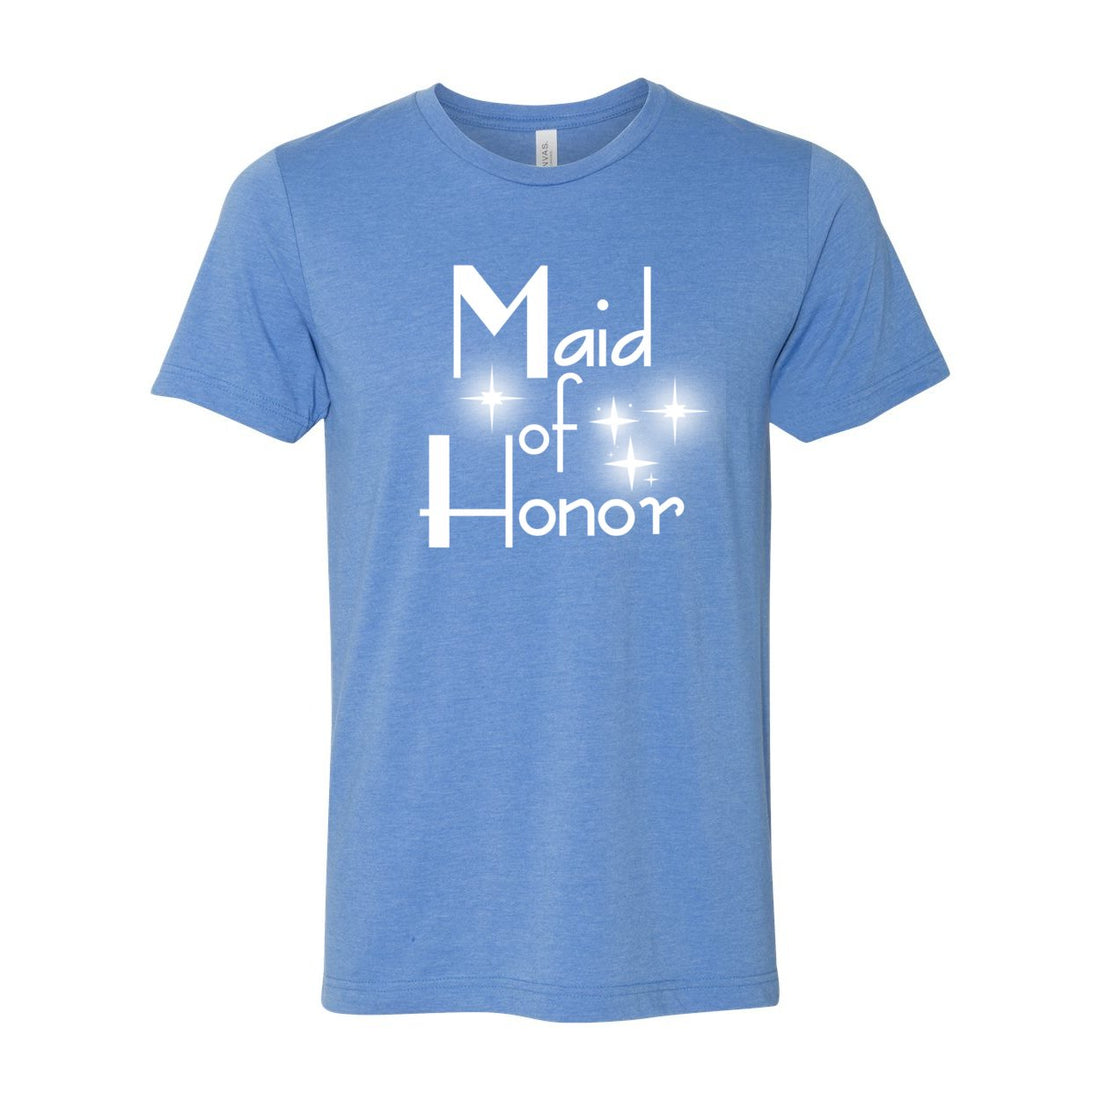 #6 Sparkle Maid of Honor Short Sleeve Jersey Tee - T-Shirts - Positively Sassy - #6 Sparkle Maid of Honor Short Sleeve Jersey Tee